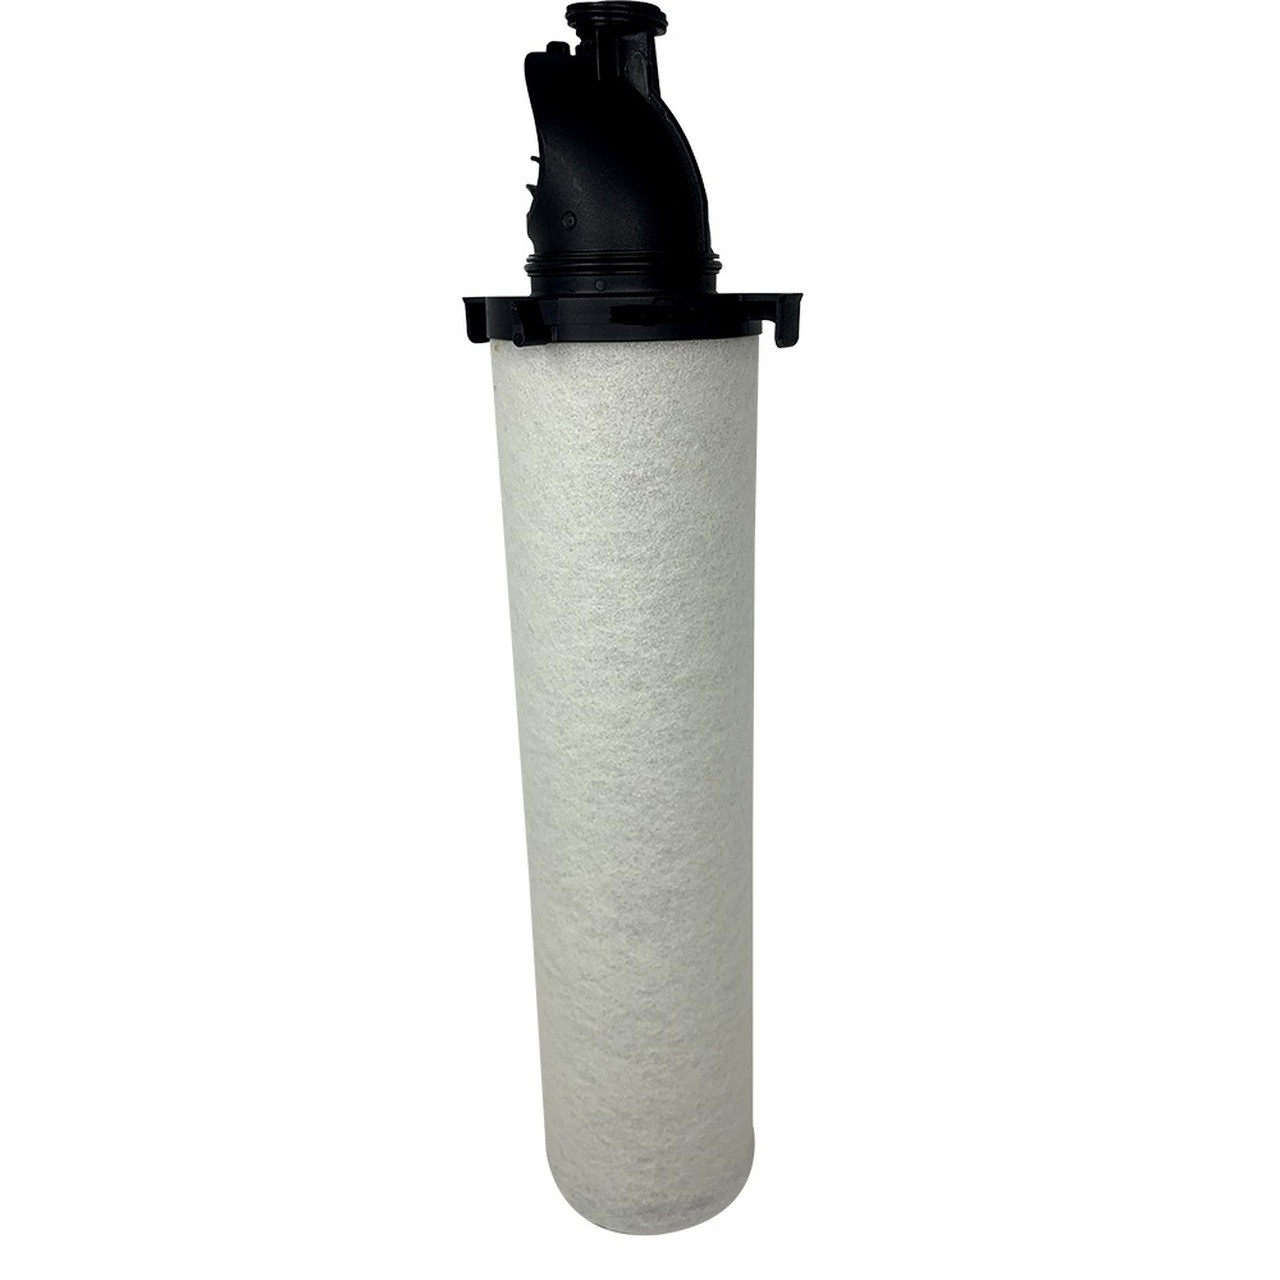 OEM Equivalent Sullair 02250194-967 Replacement Filter Element 